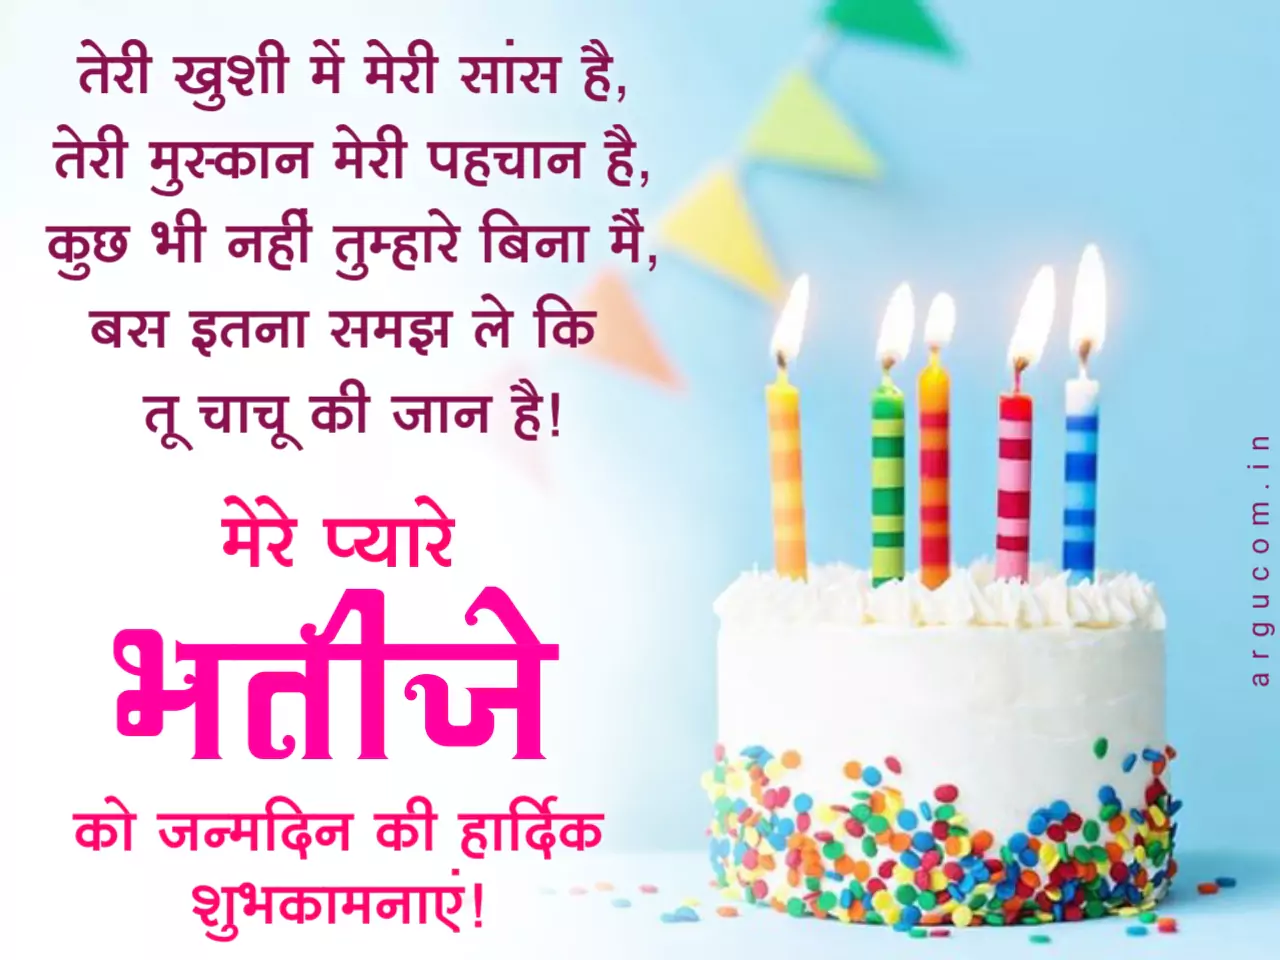 Happy birthday images for nephew in hindi